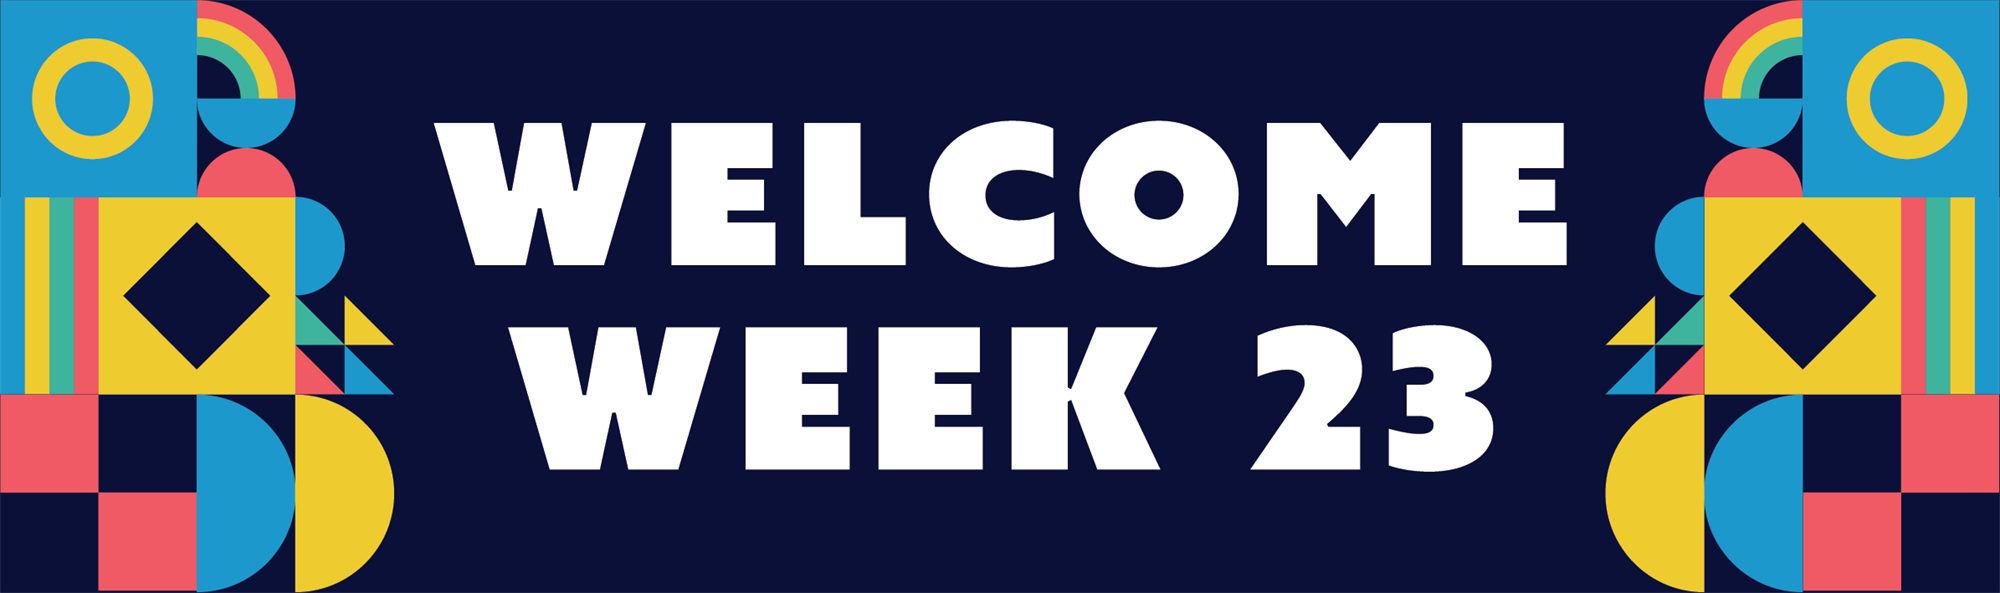 University of Chichester Welcome Week